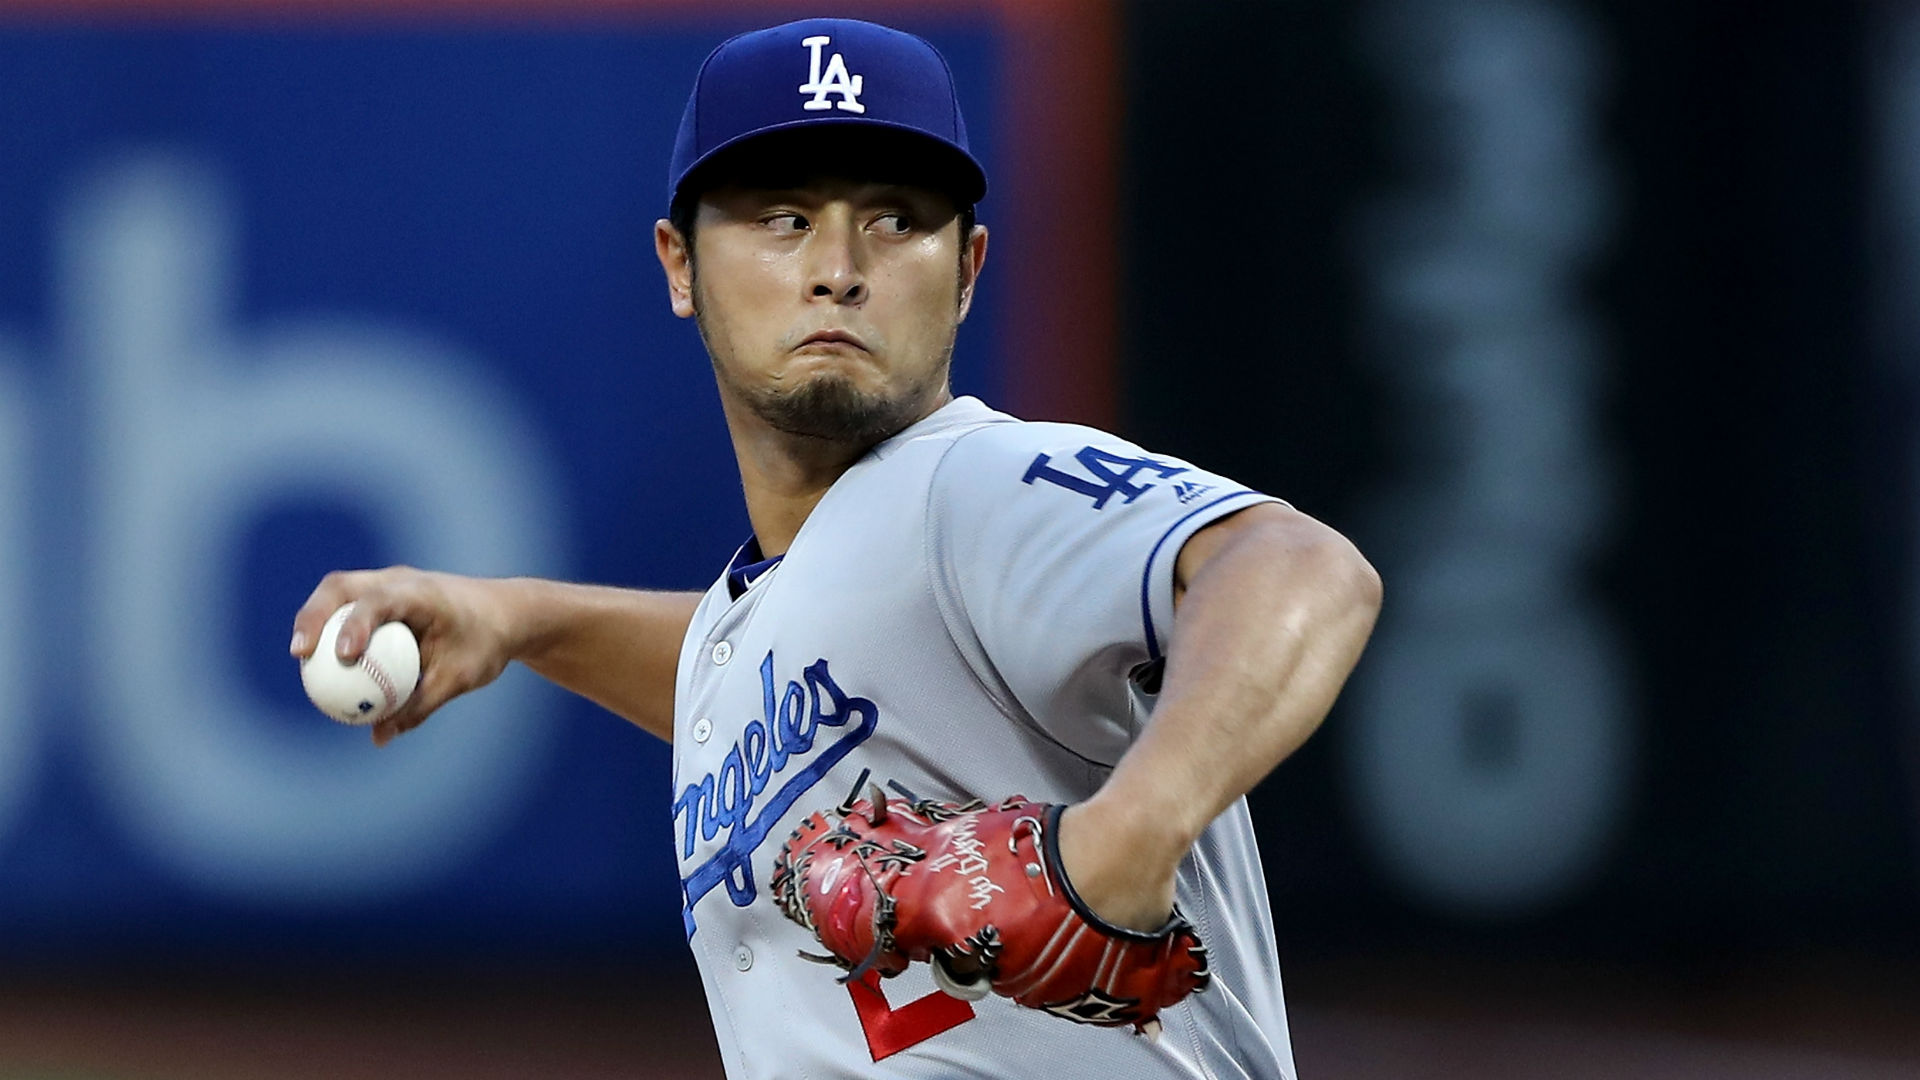 Cubs Sign Free Agent SP Yu Darvish to Six-Year, $126M Contract